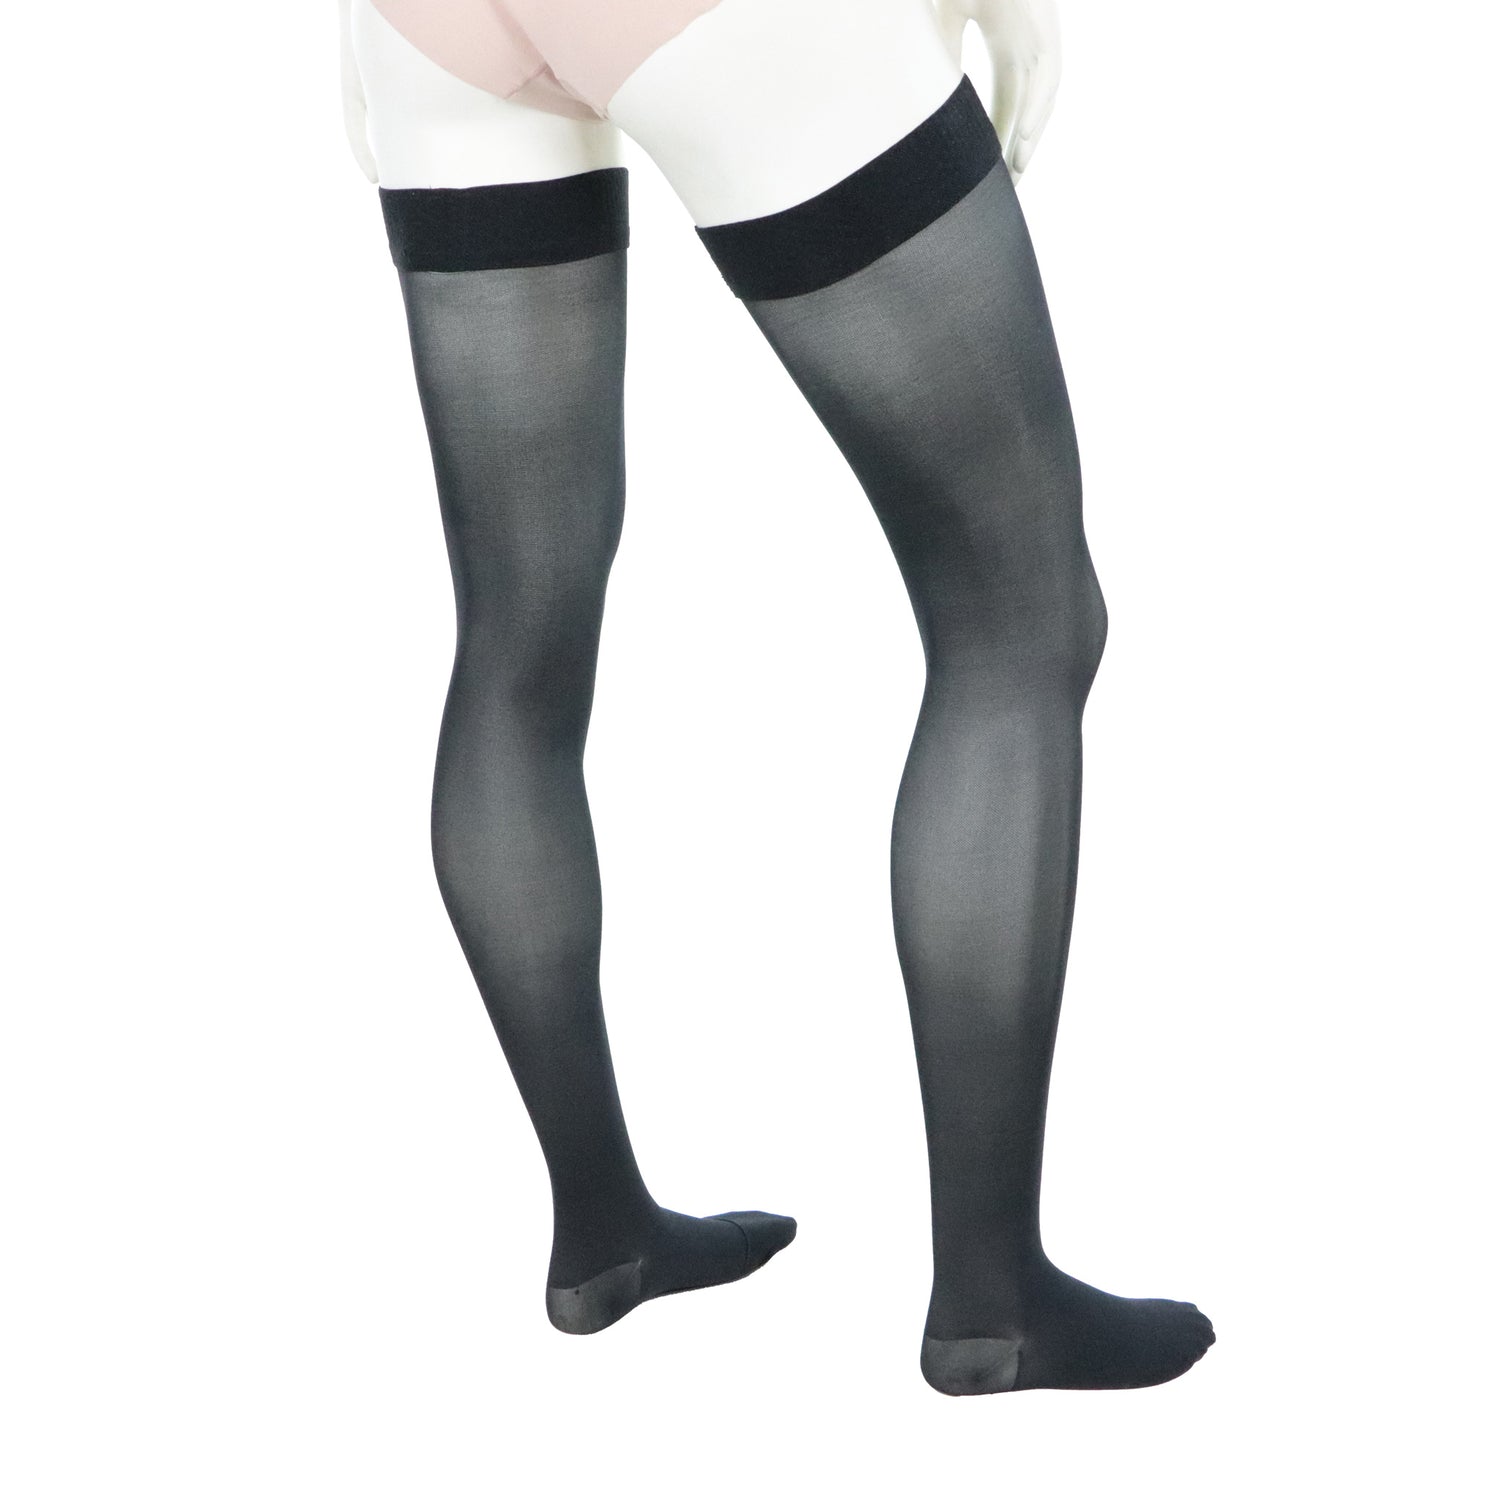 Female thigh high compression stockings 20 30 mmhg black Doctor Brace right rear view